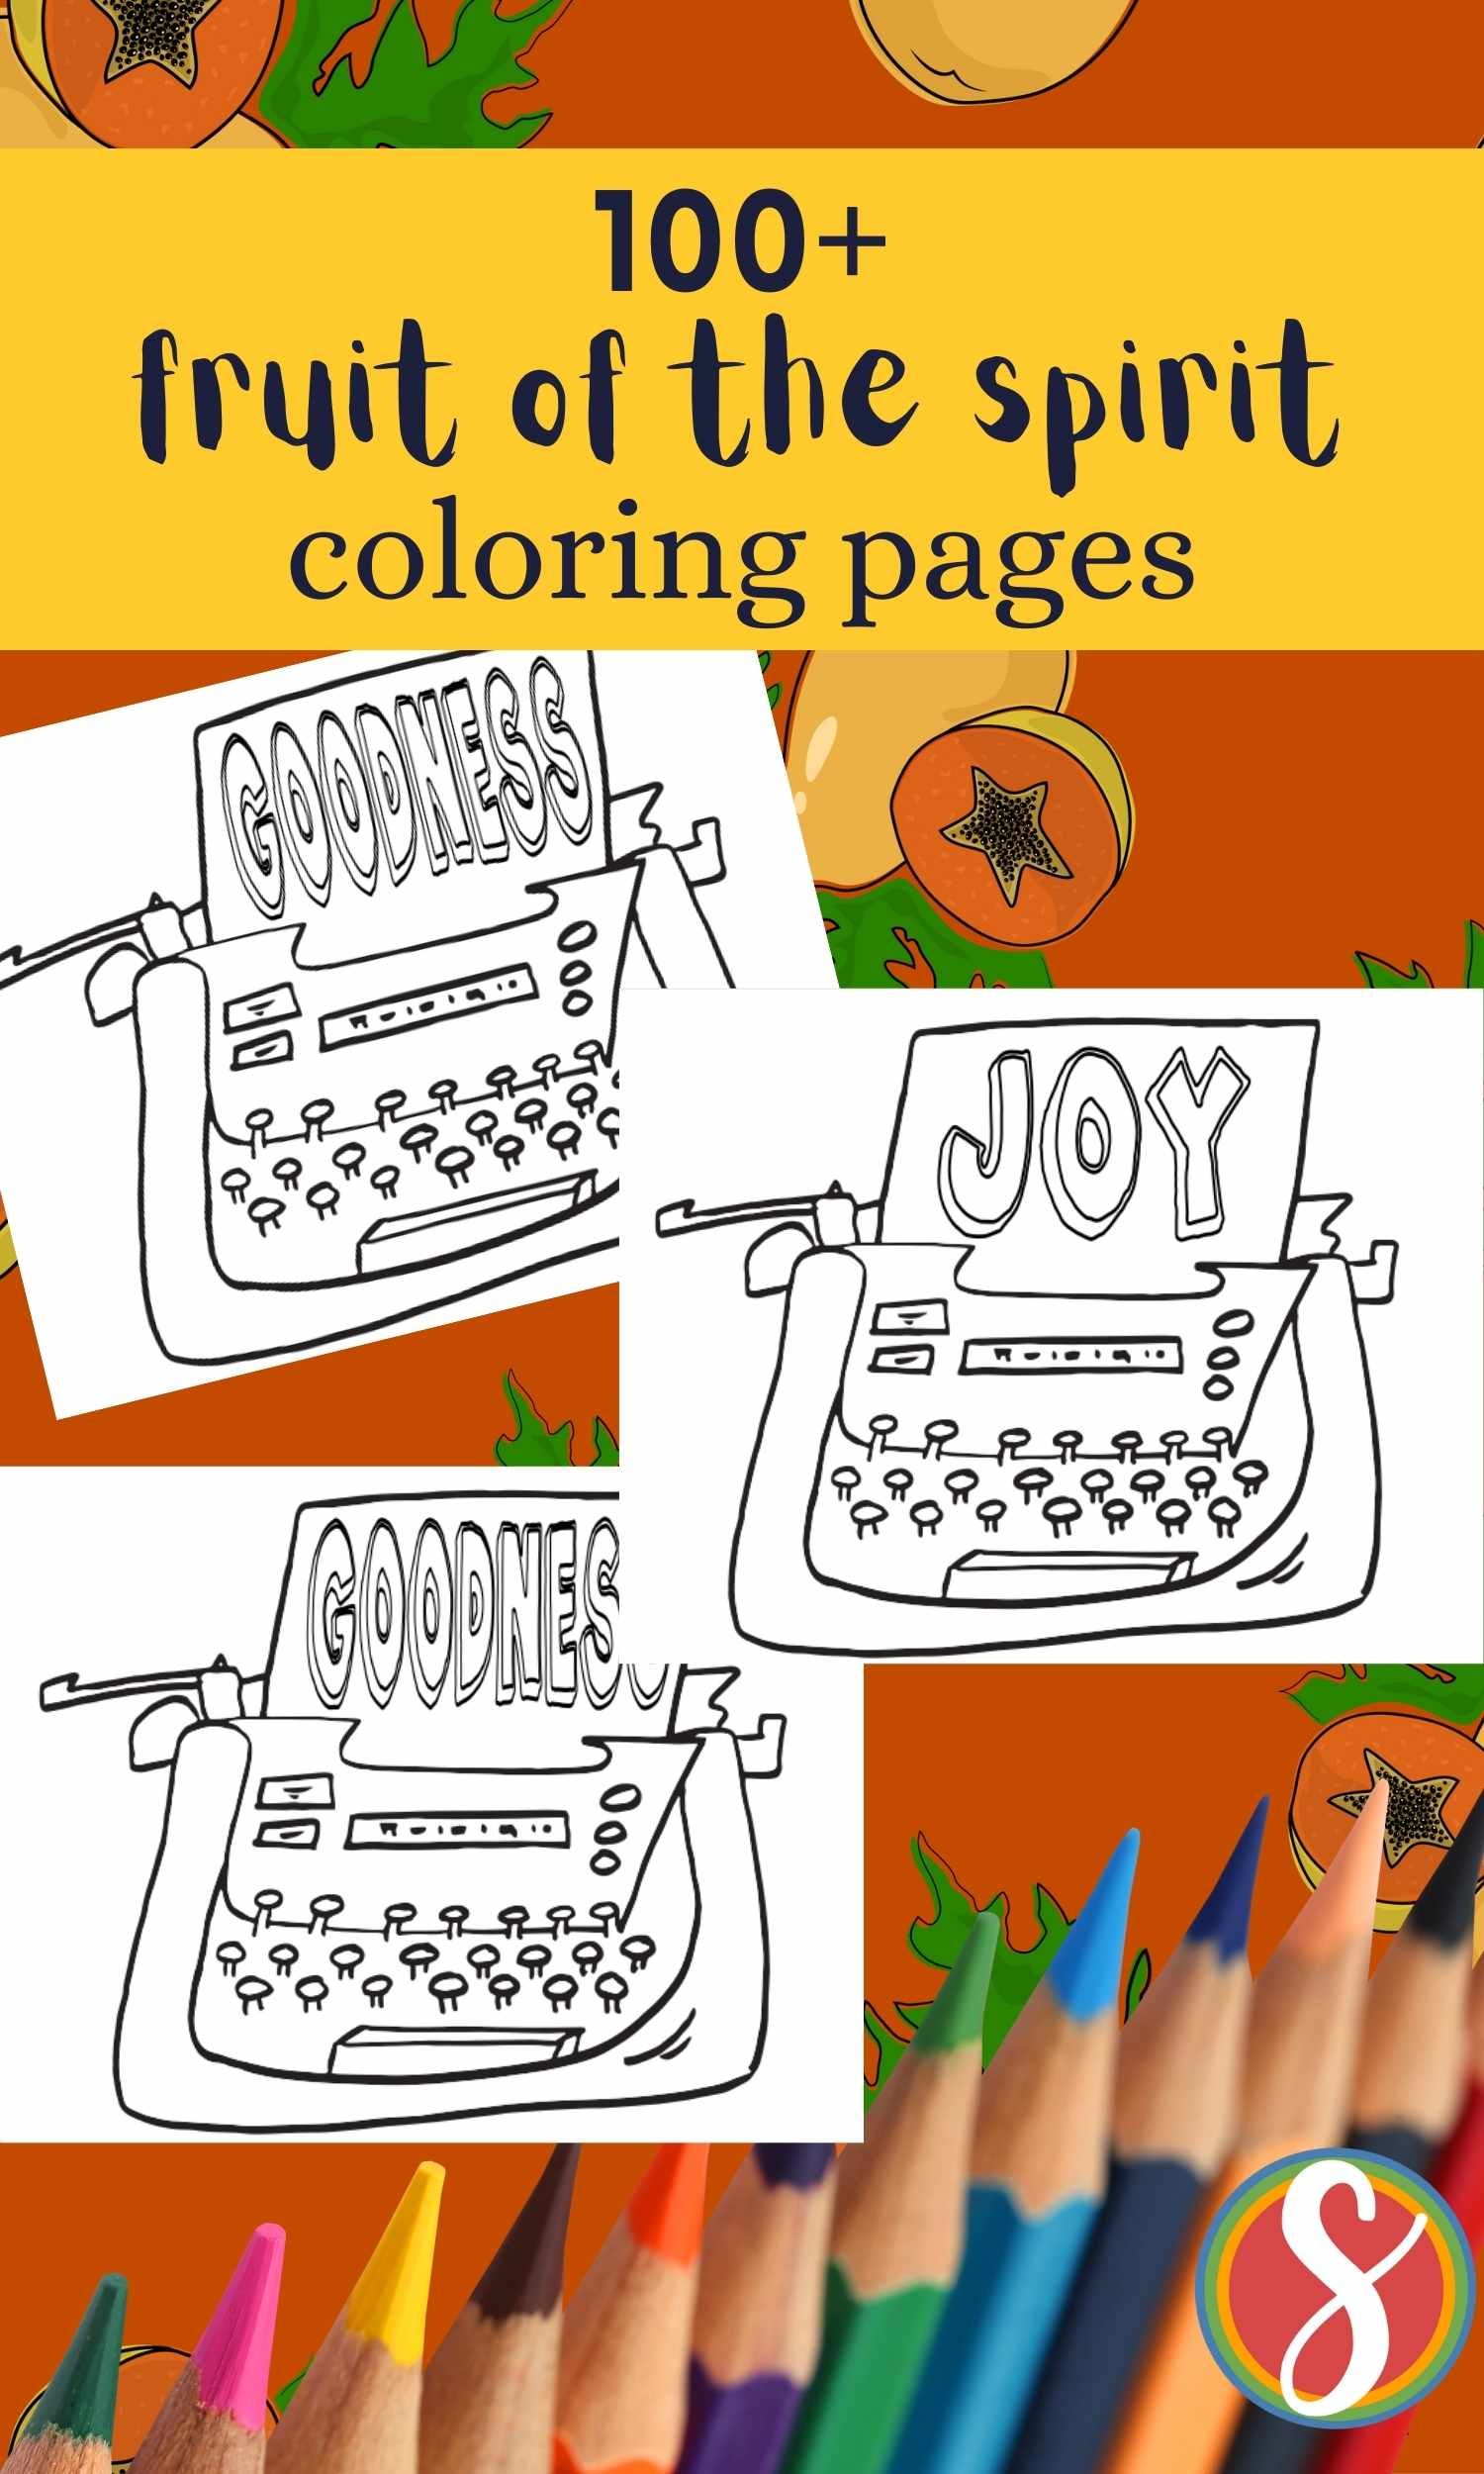 a bunch of fruit of the spirit coloring pages with the fruit written on a page in a typewriter